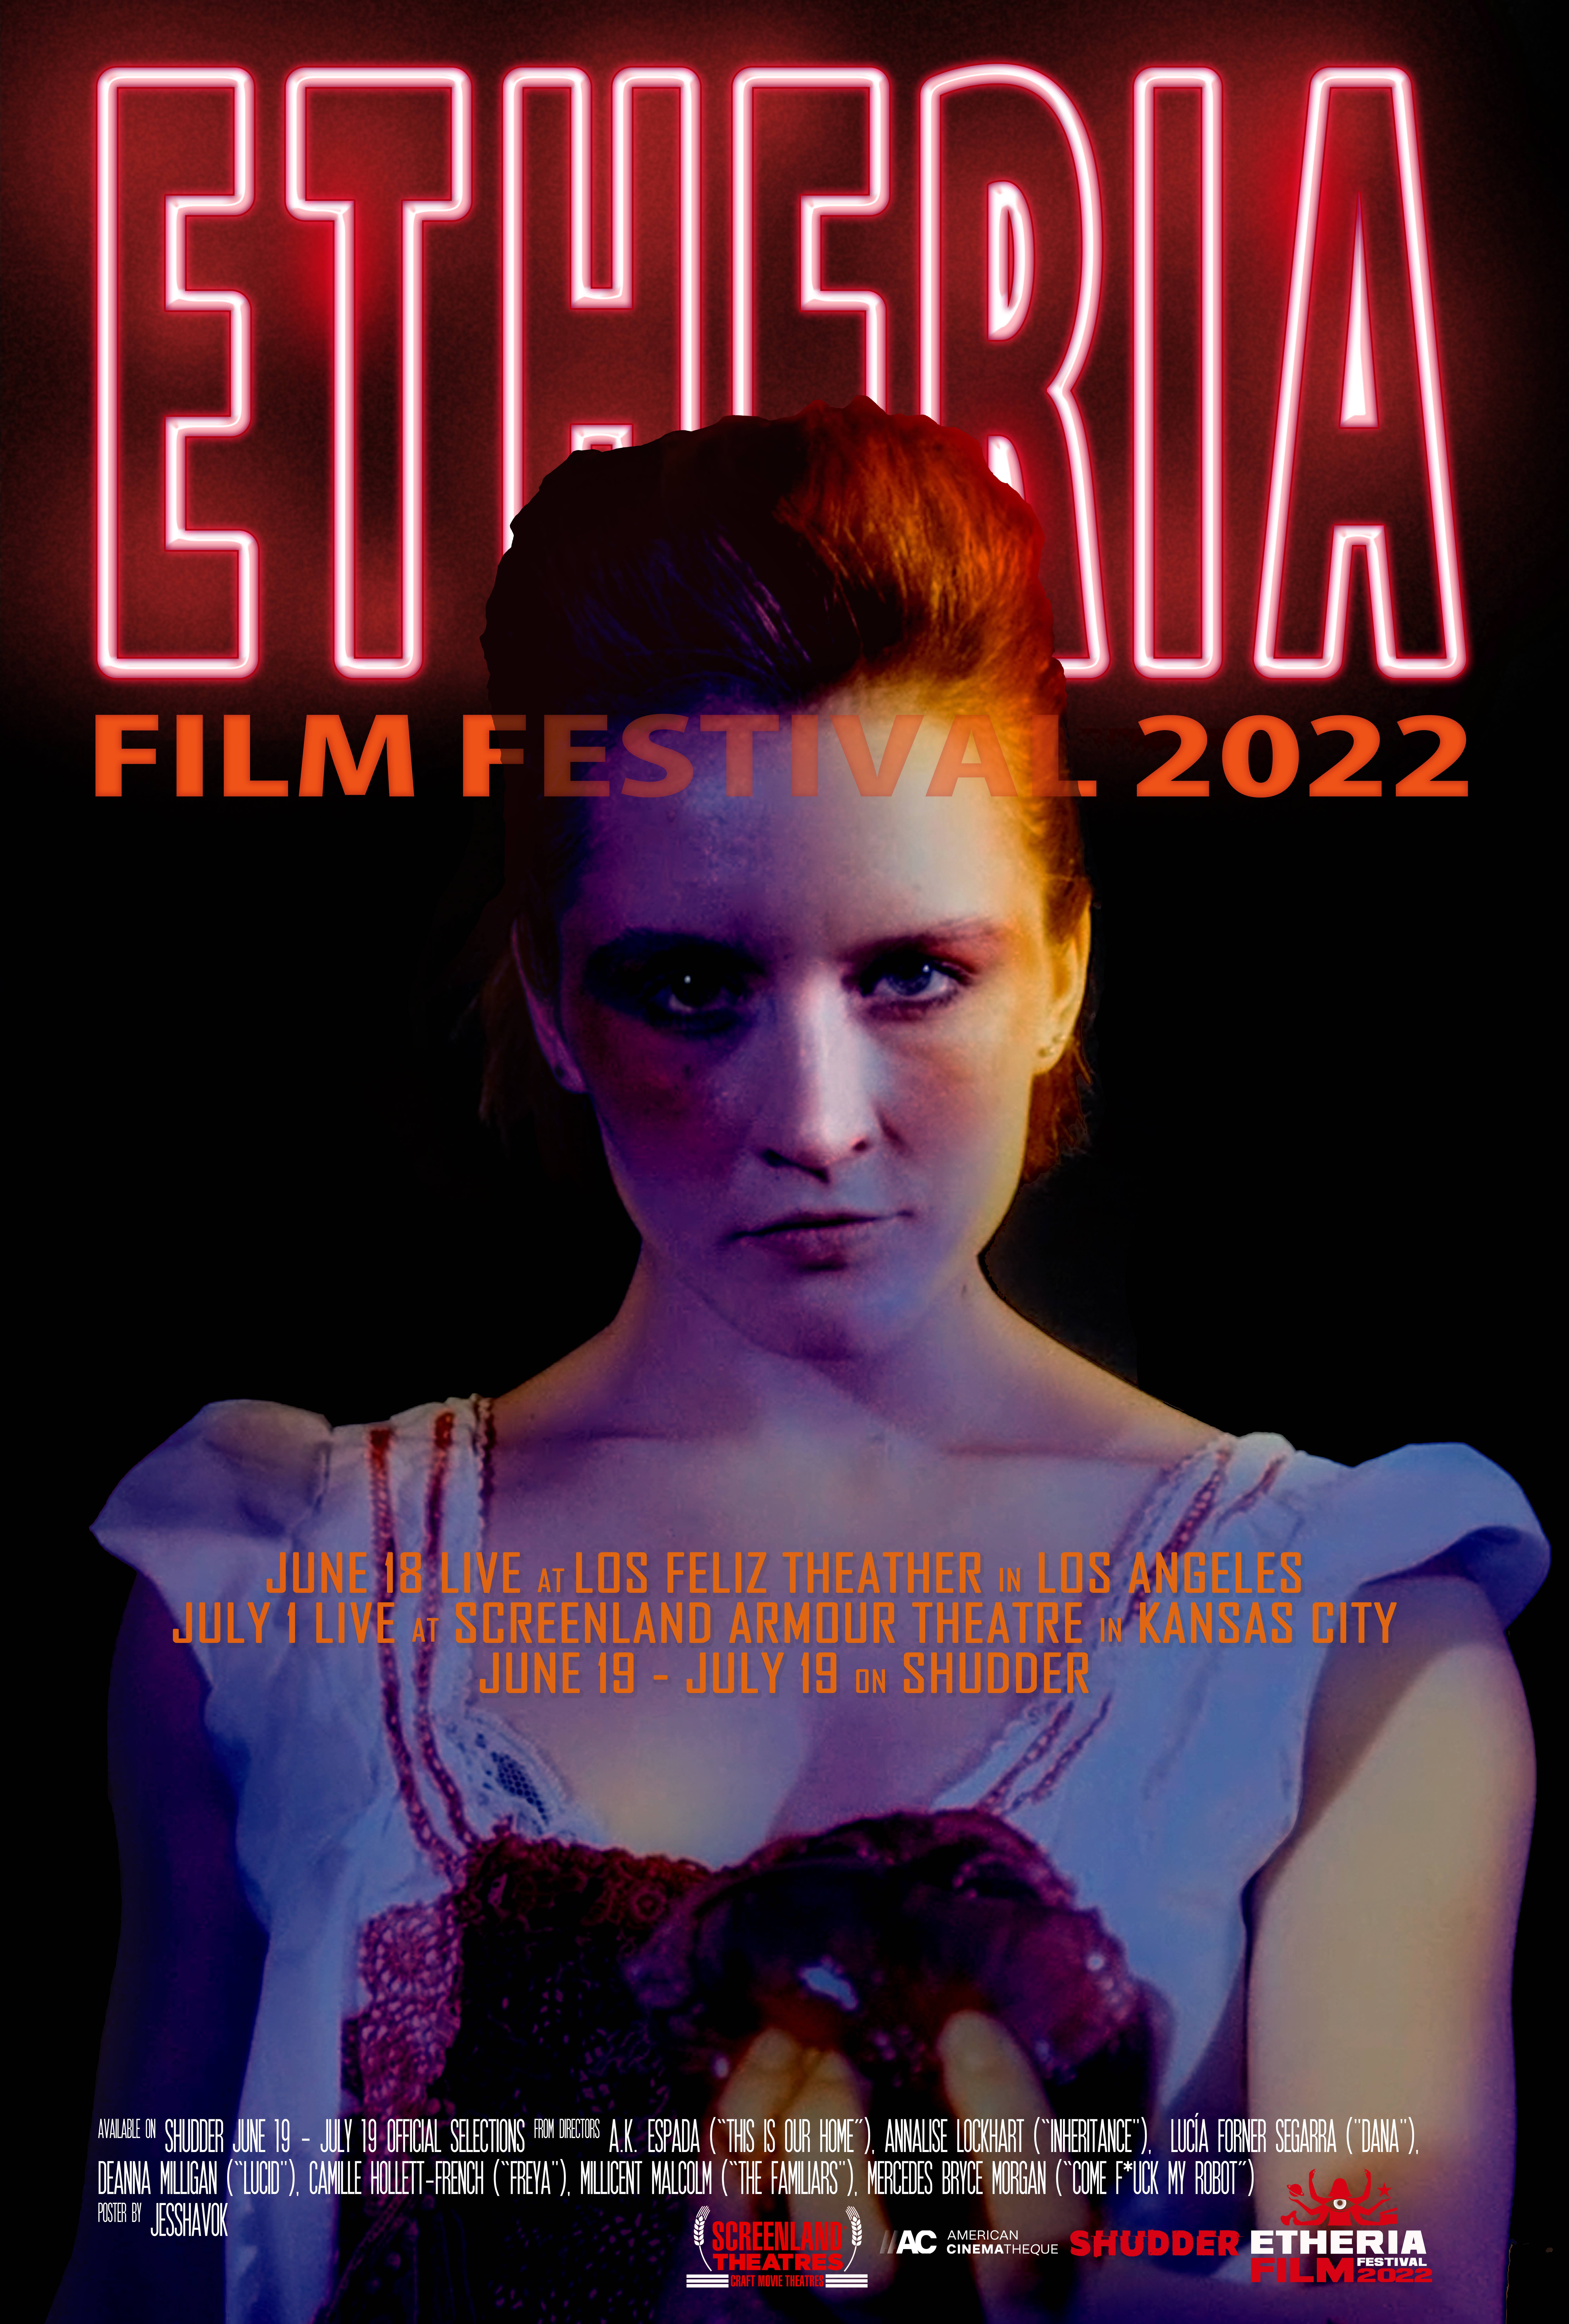 4hviOyh - Etheria Film Festival Announces Their Incredible Line-Up of Horror and Sci-Fi Directed by Women [Exclusive]